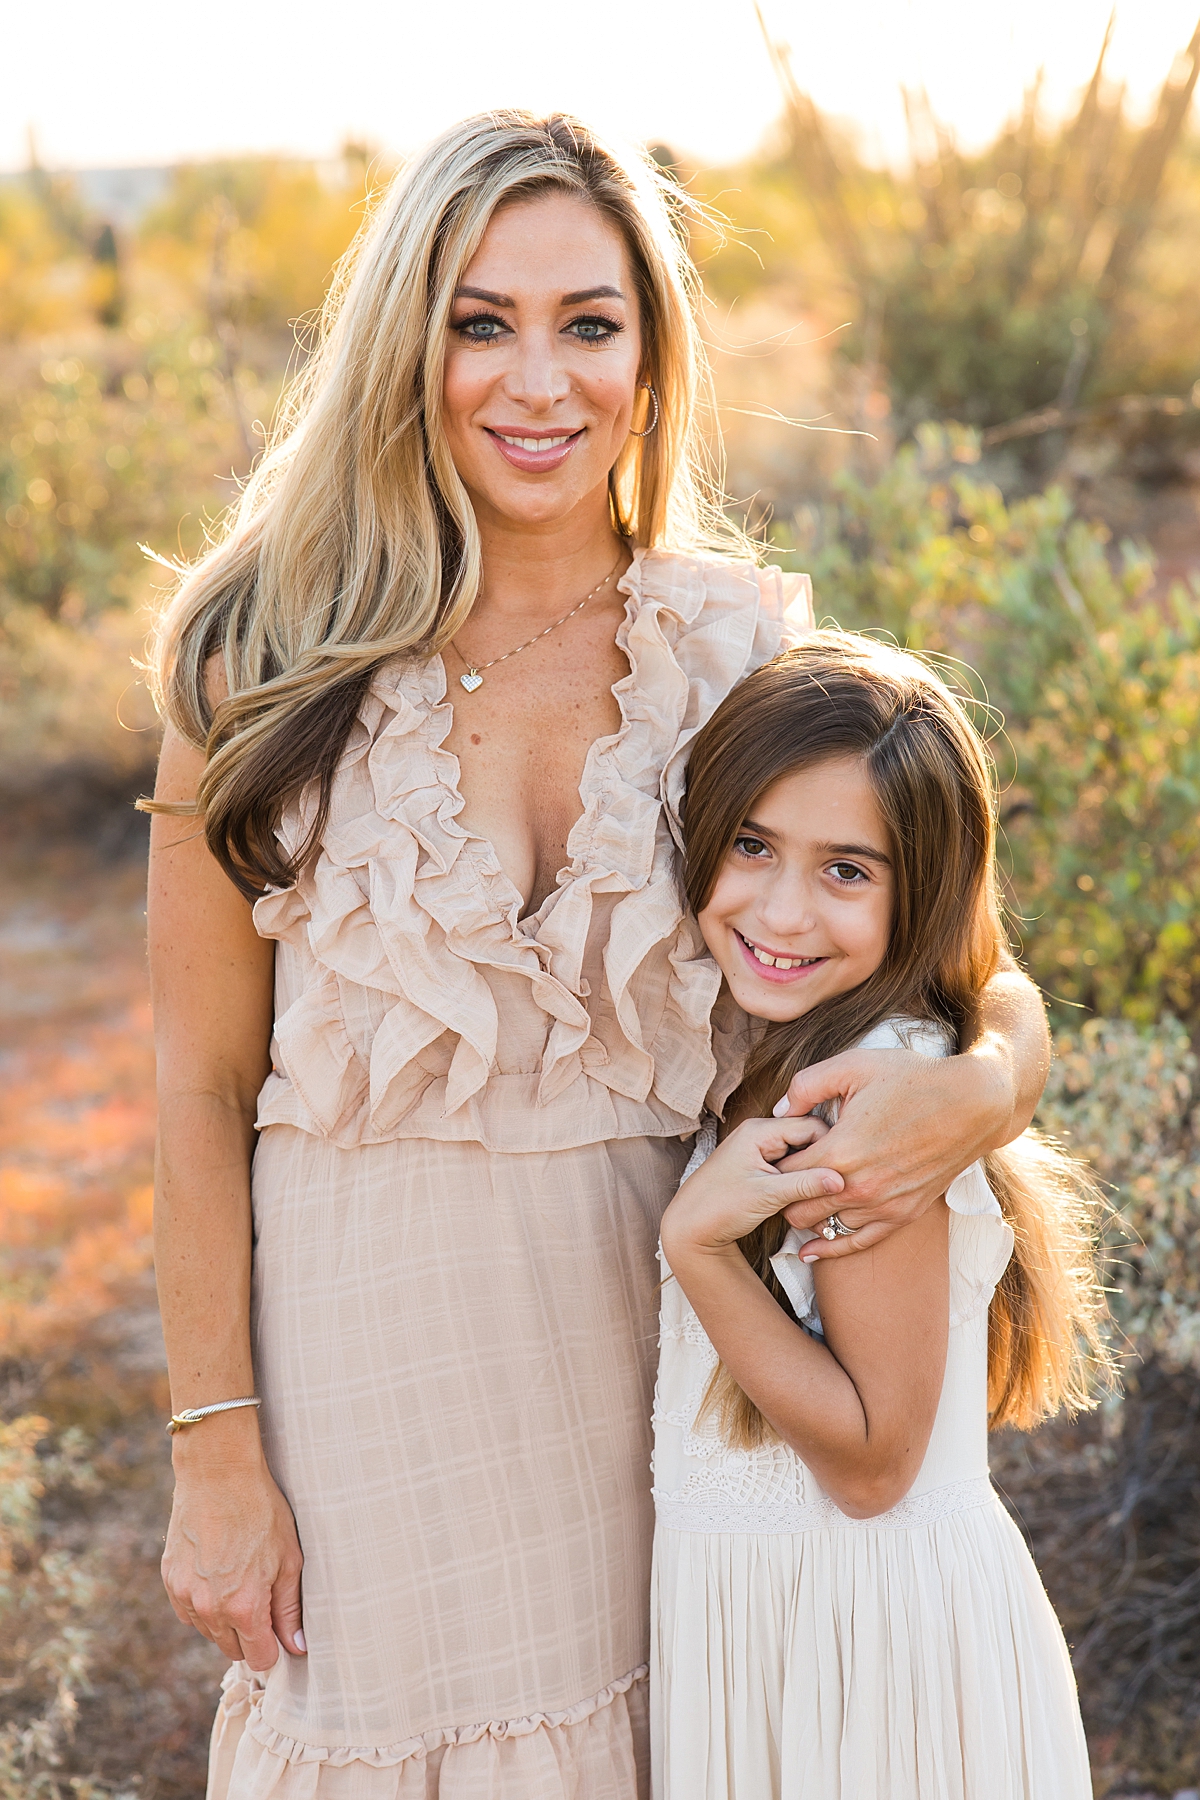 Leah Hope Photography | Scottsdale Arizona Family Photographer | Phoenix Arizona Family Pictures | Desert Landscape Cactus Mountains Scenery | Sunset Natural Light | What to Wear | How to Pose | Family Poses | Styling Outfits for Pictures | Family Photos | Family Posing Ideas | Family Color Scheme Palette | Coordinating Outfits | Golden Hour Sunlight | Family Photo Shoot Outfit Inspiration